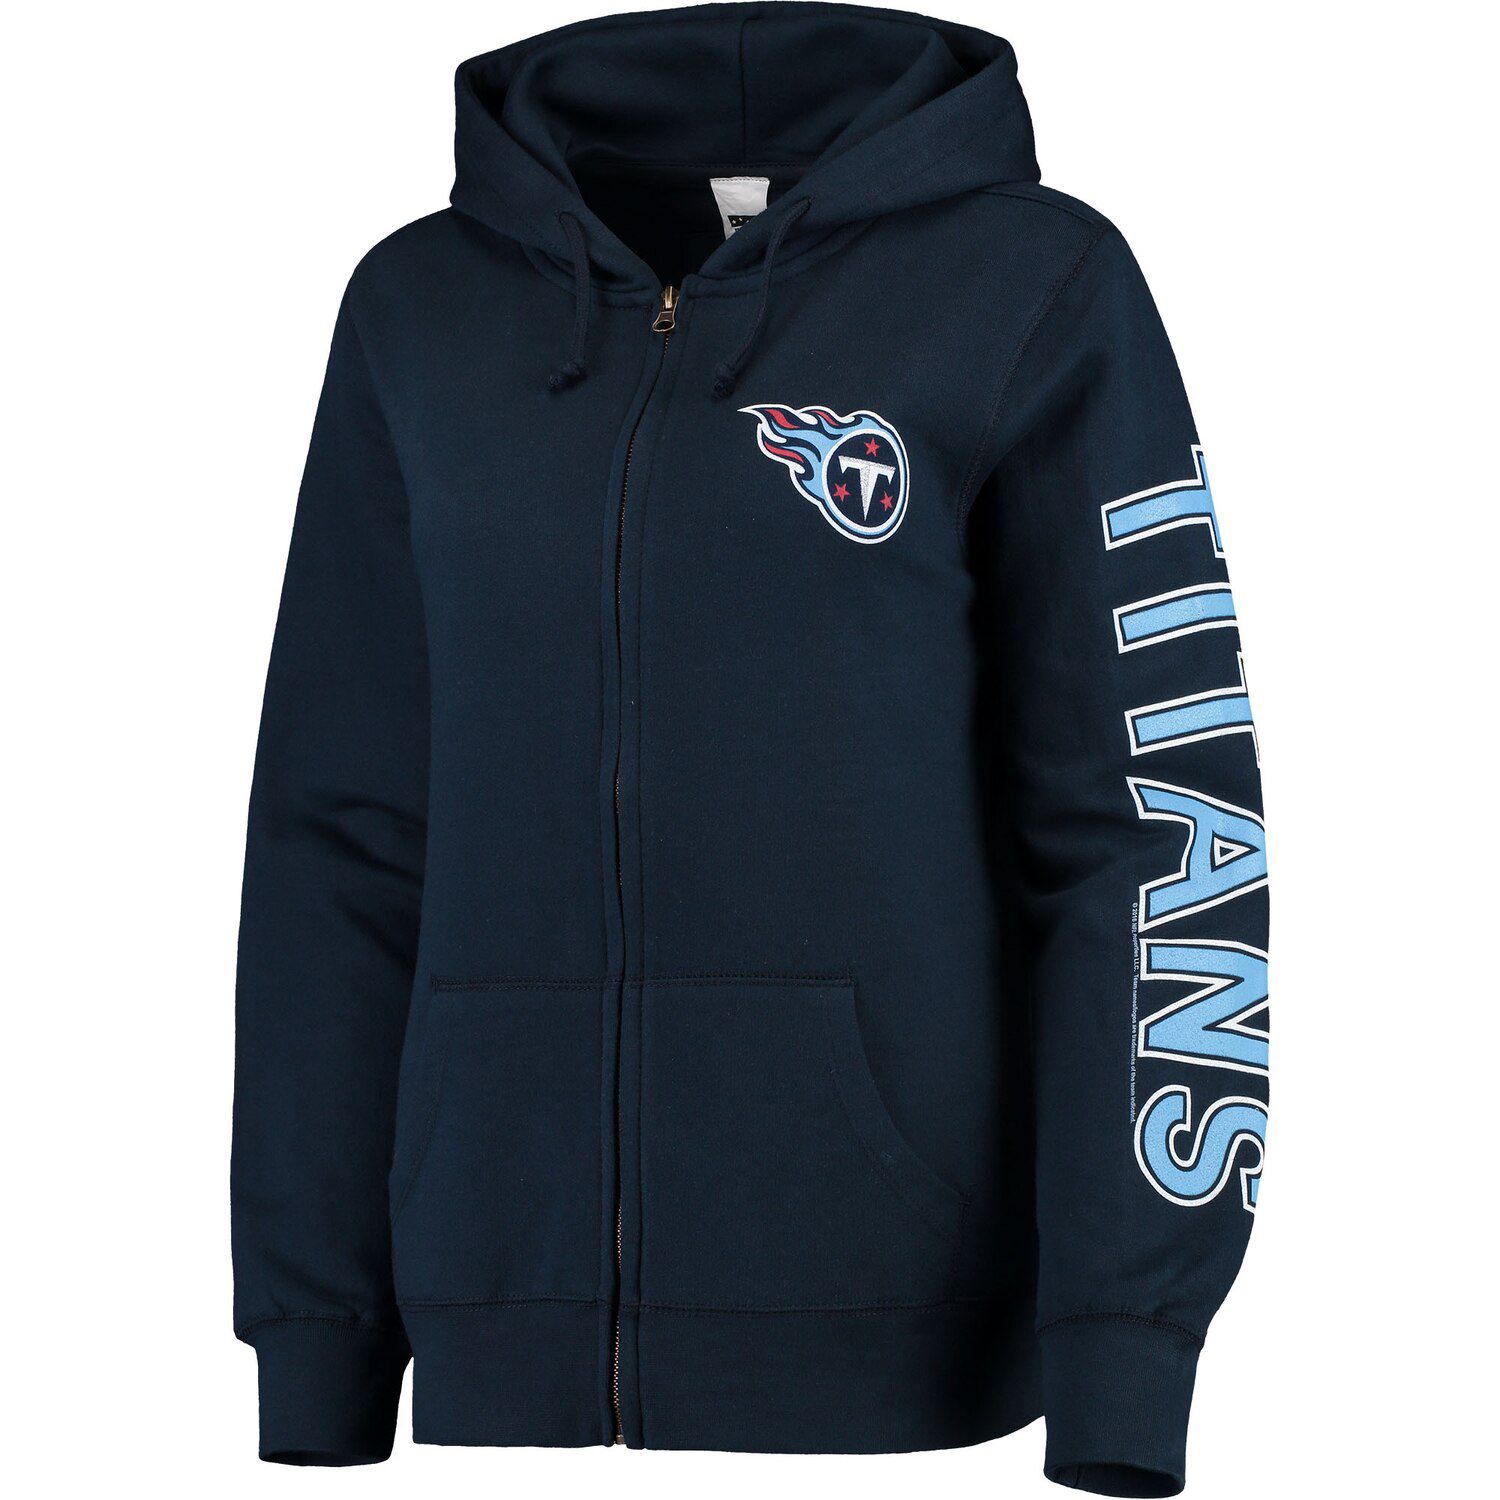 tennessee titans women's hoodie